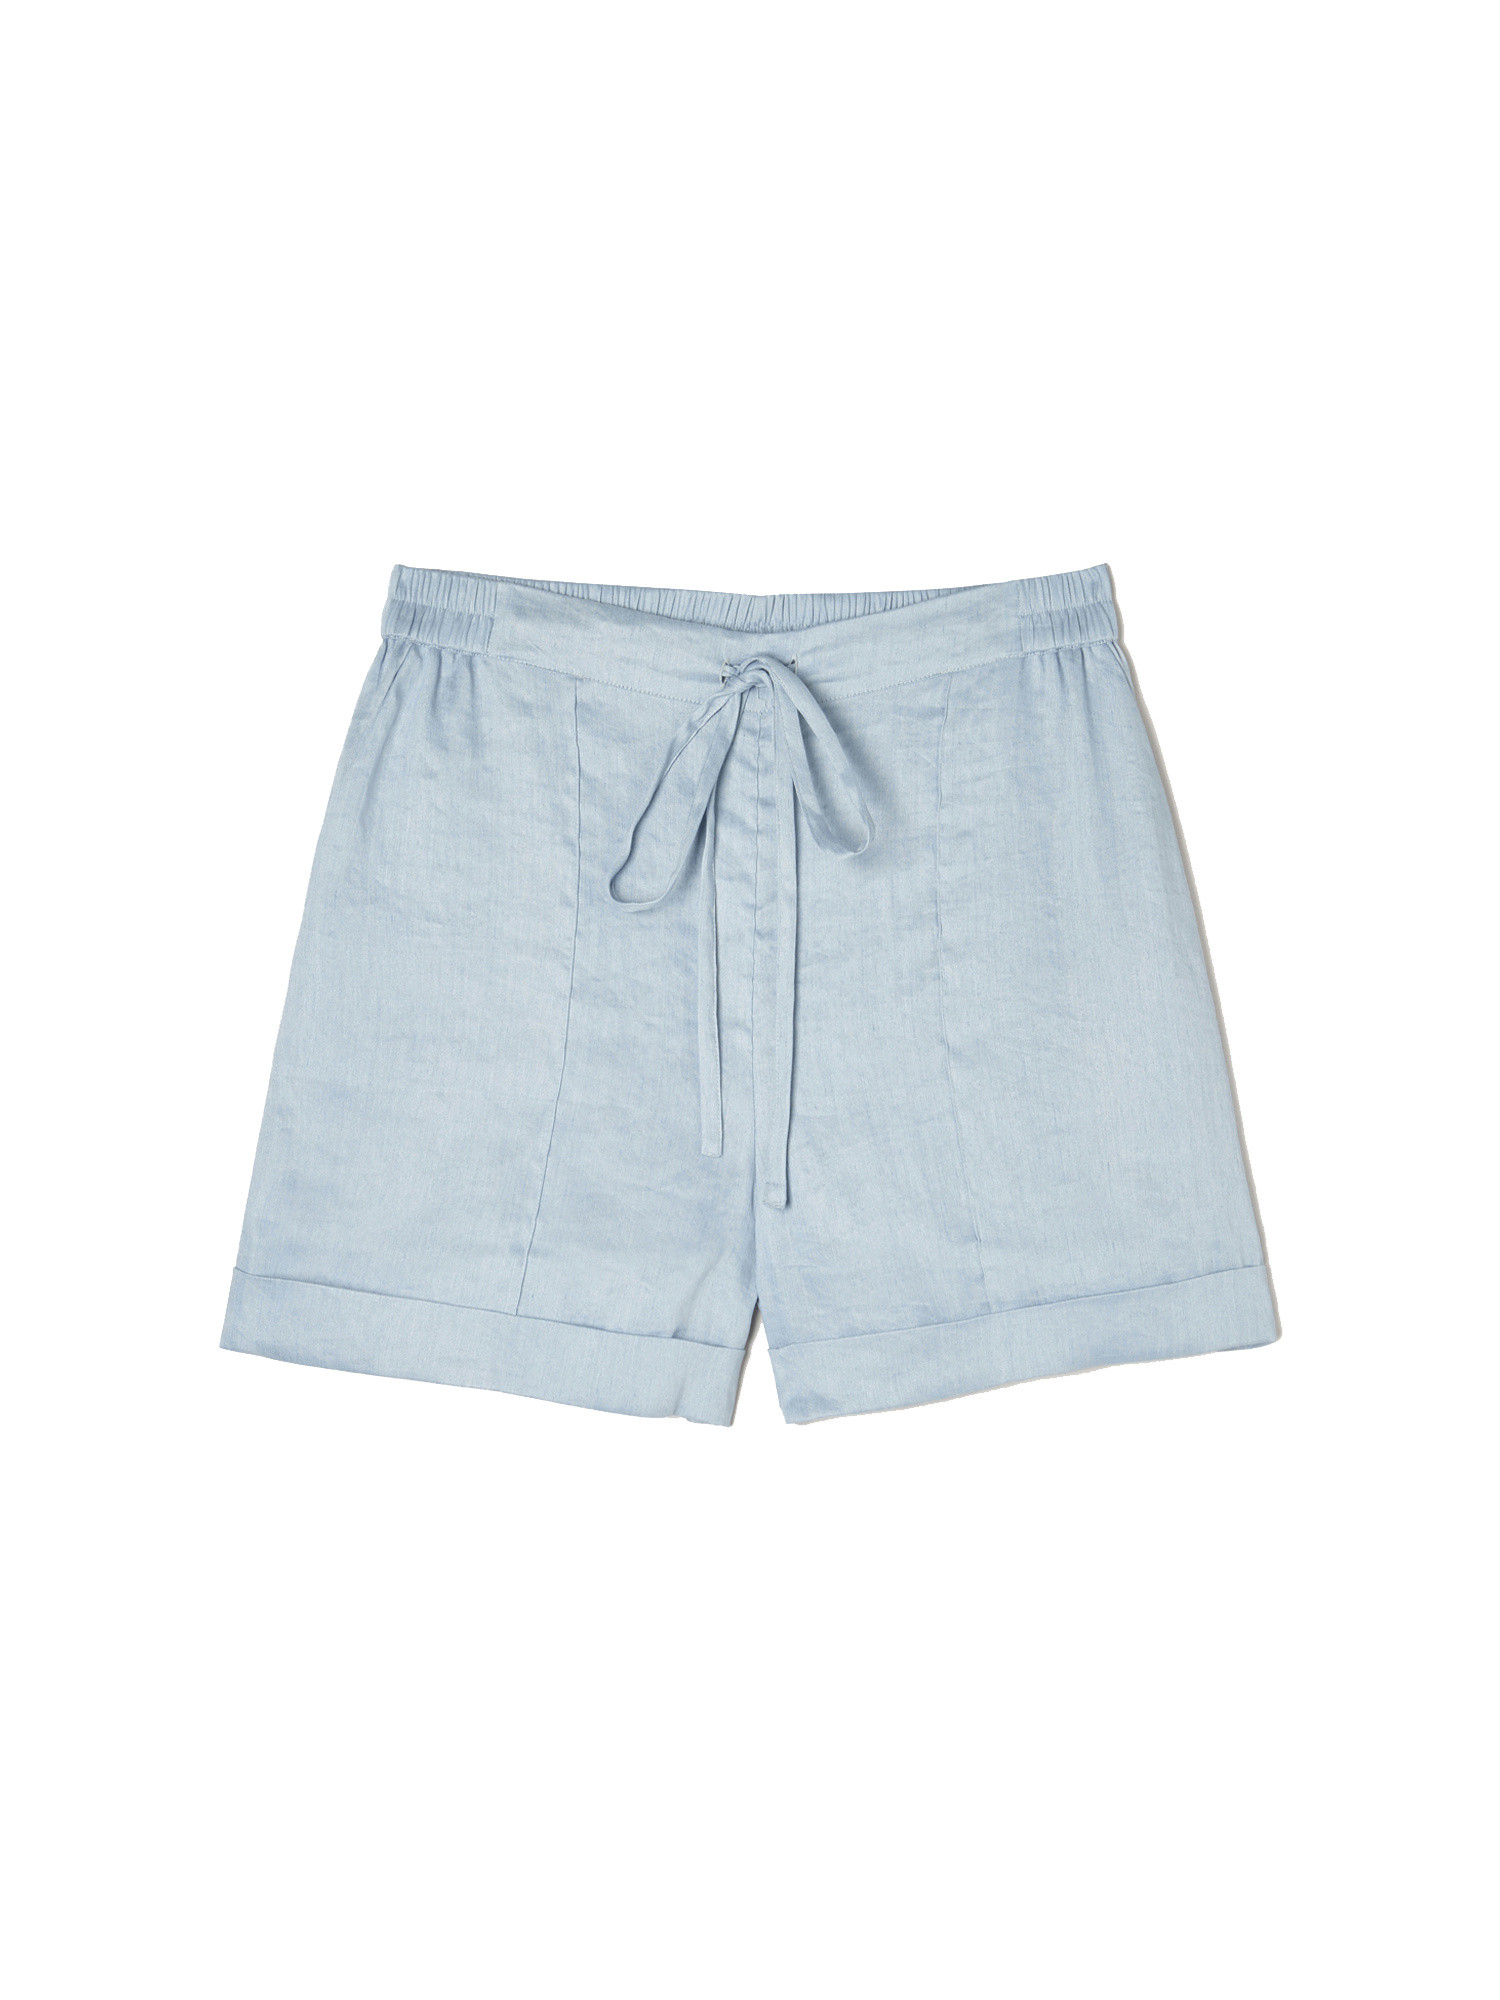 Attic and Barn - Linen and viscose shorts, Light Blue, large image number 0